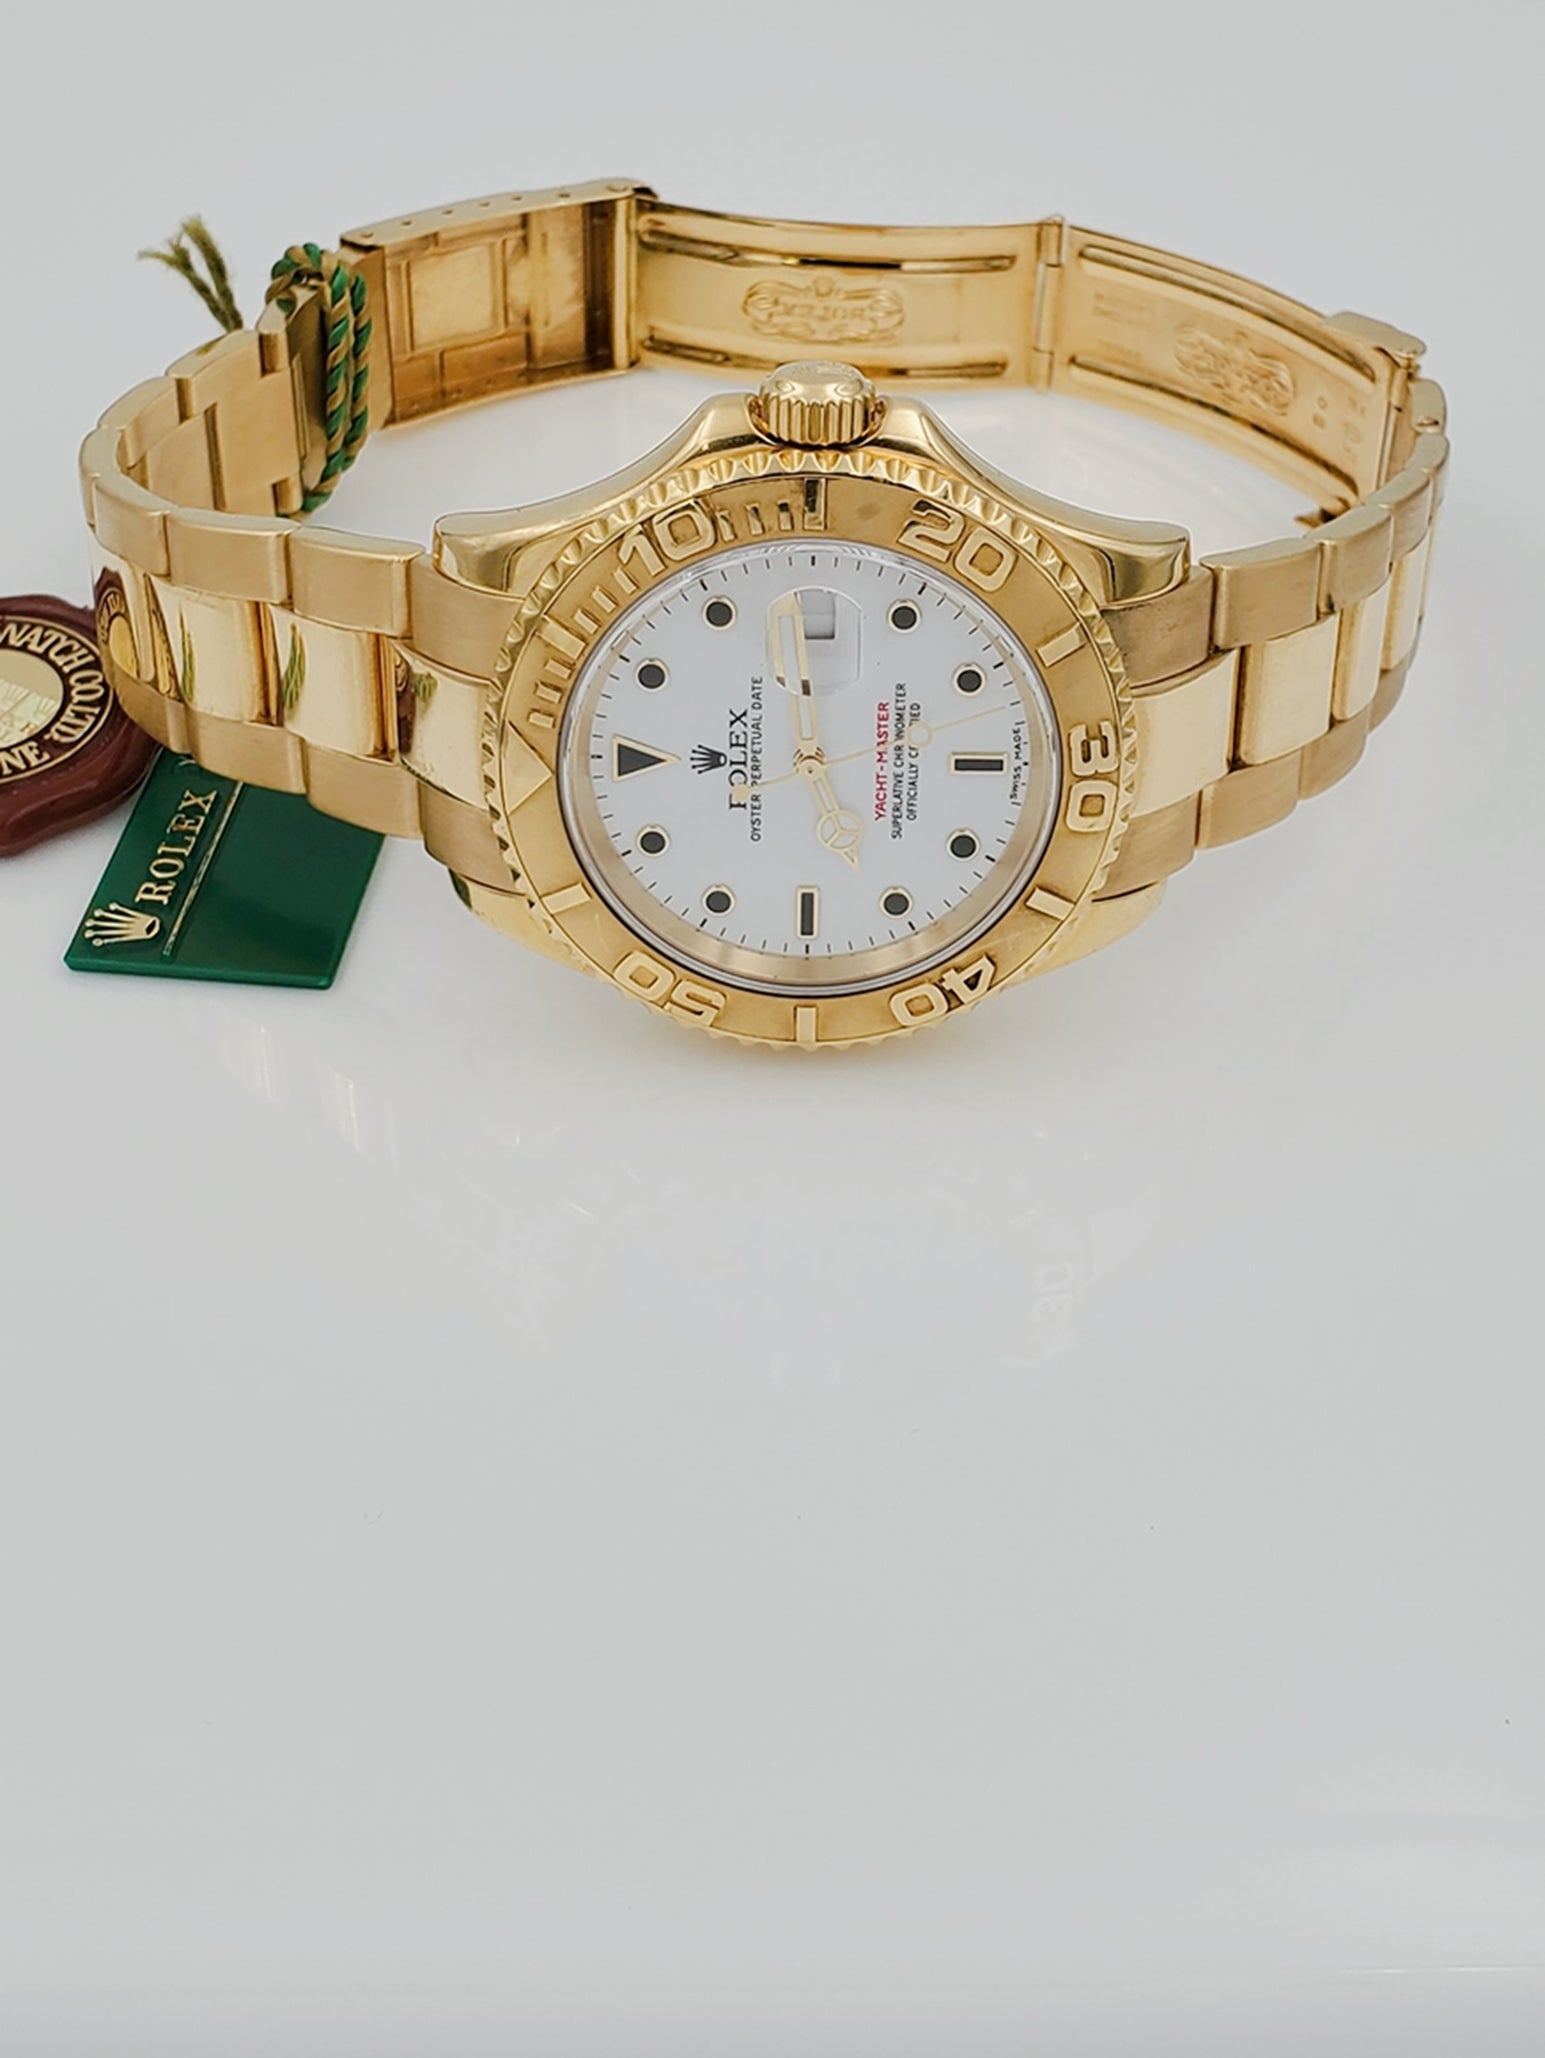 Men's Rolex Yacht Master 40mm Oyster Perpetual 18K Solid Yellow Gold Watch with White Dial. (Pre-Owned 16628)